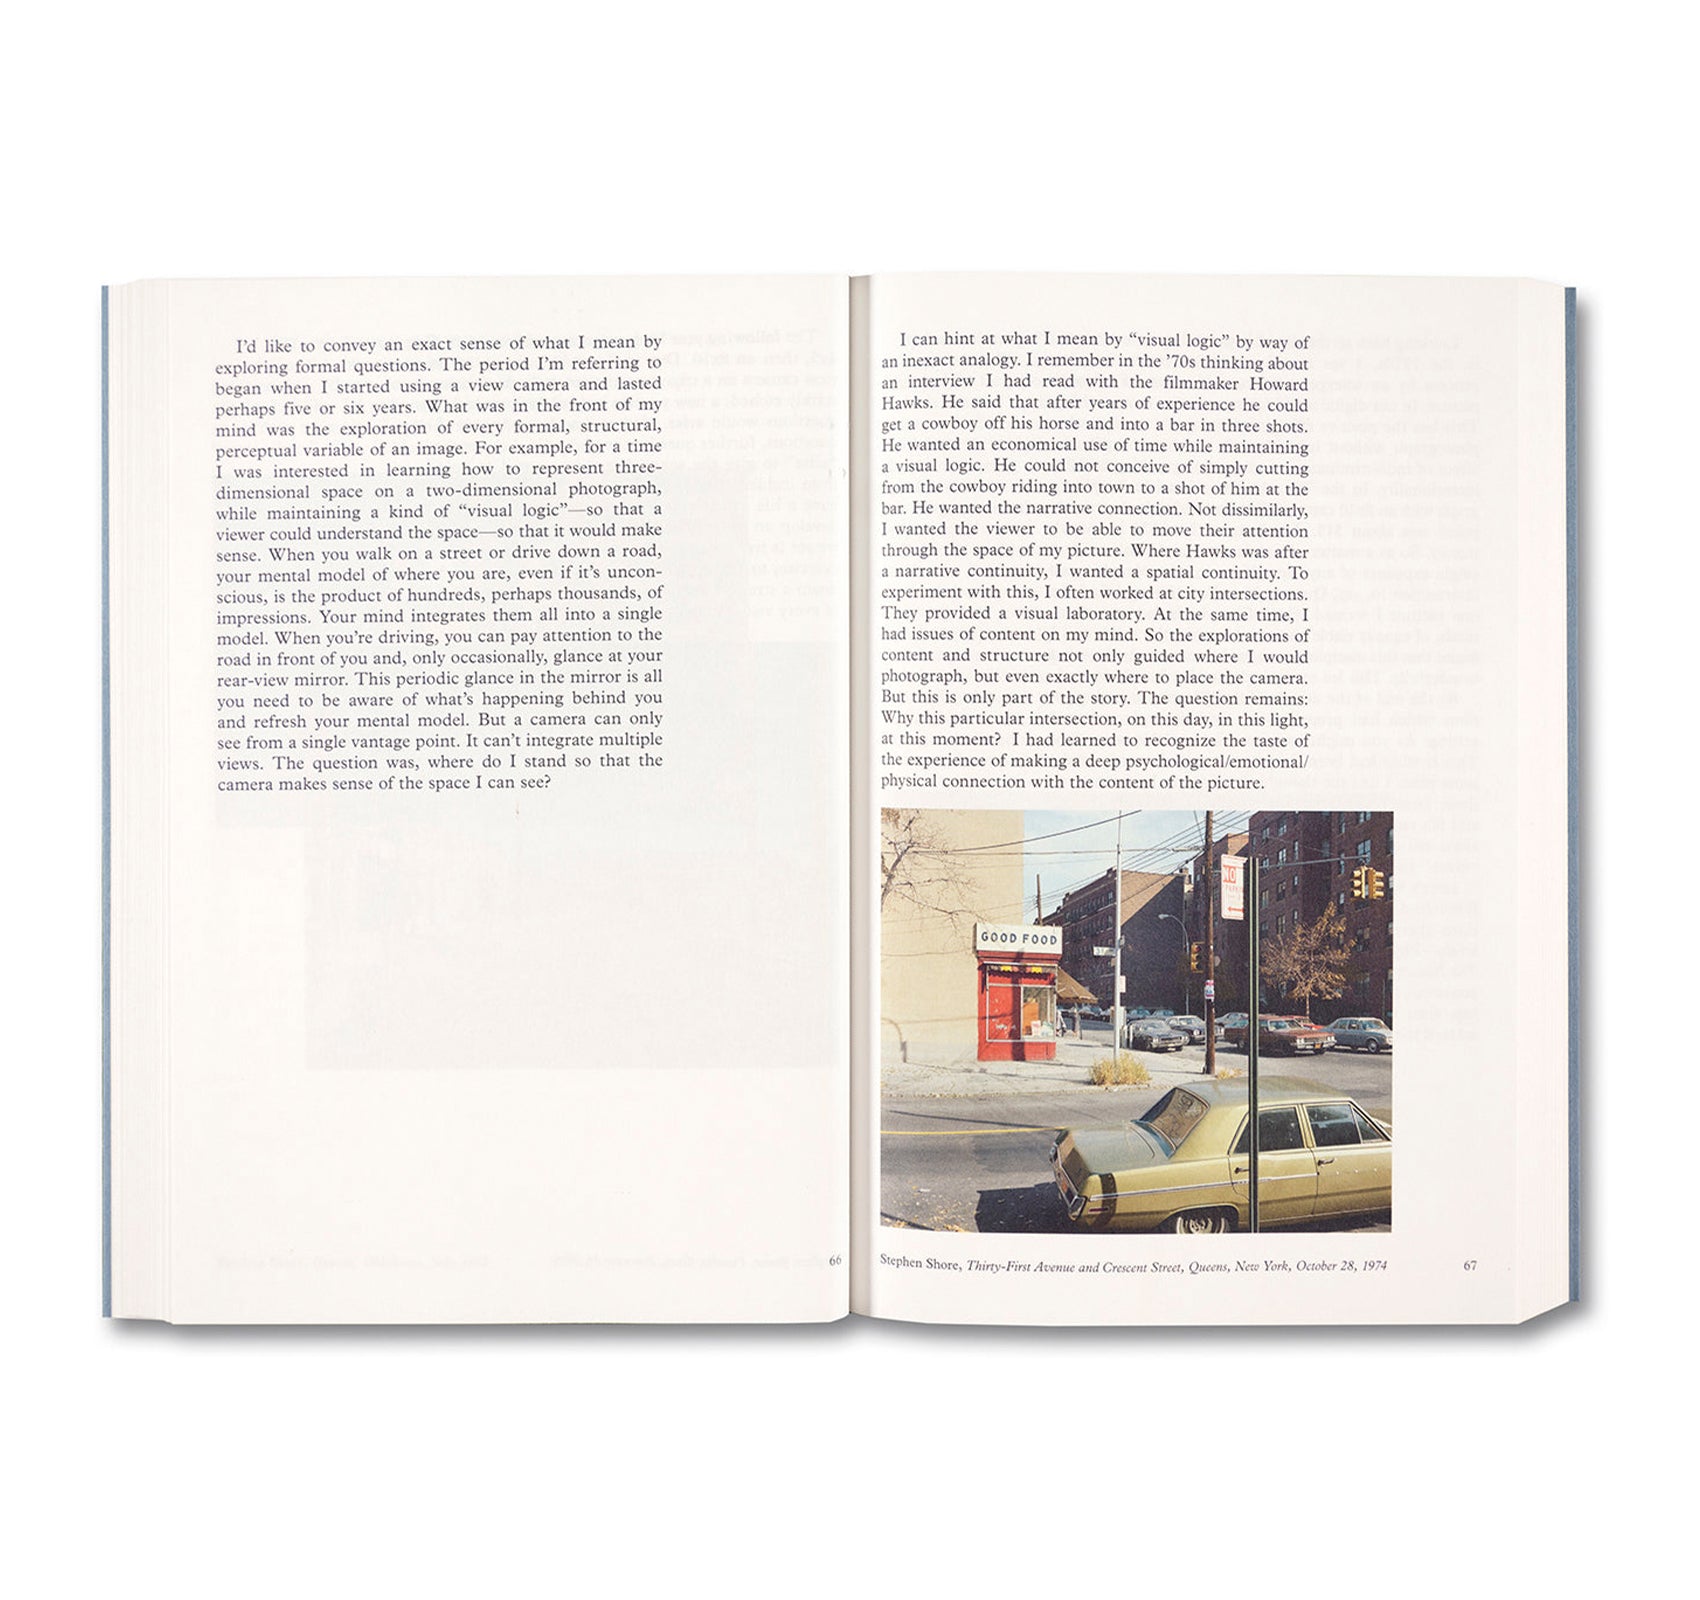 MODERN INSTANCES: THE CRAFT OF PHOTOGRAPHY by Stephen Shore [EXPANDED EDITION / SIGNED]